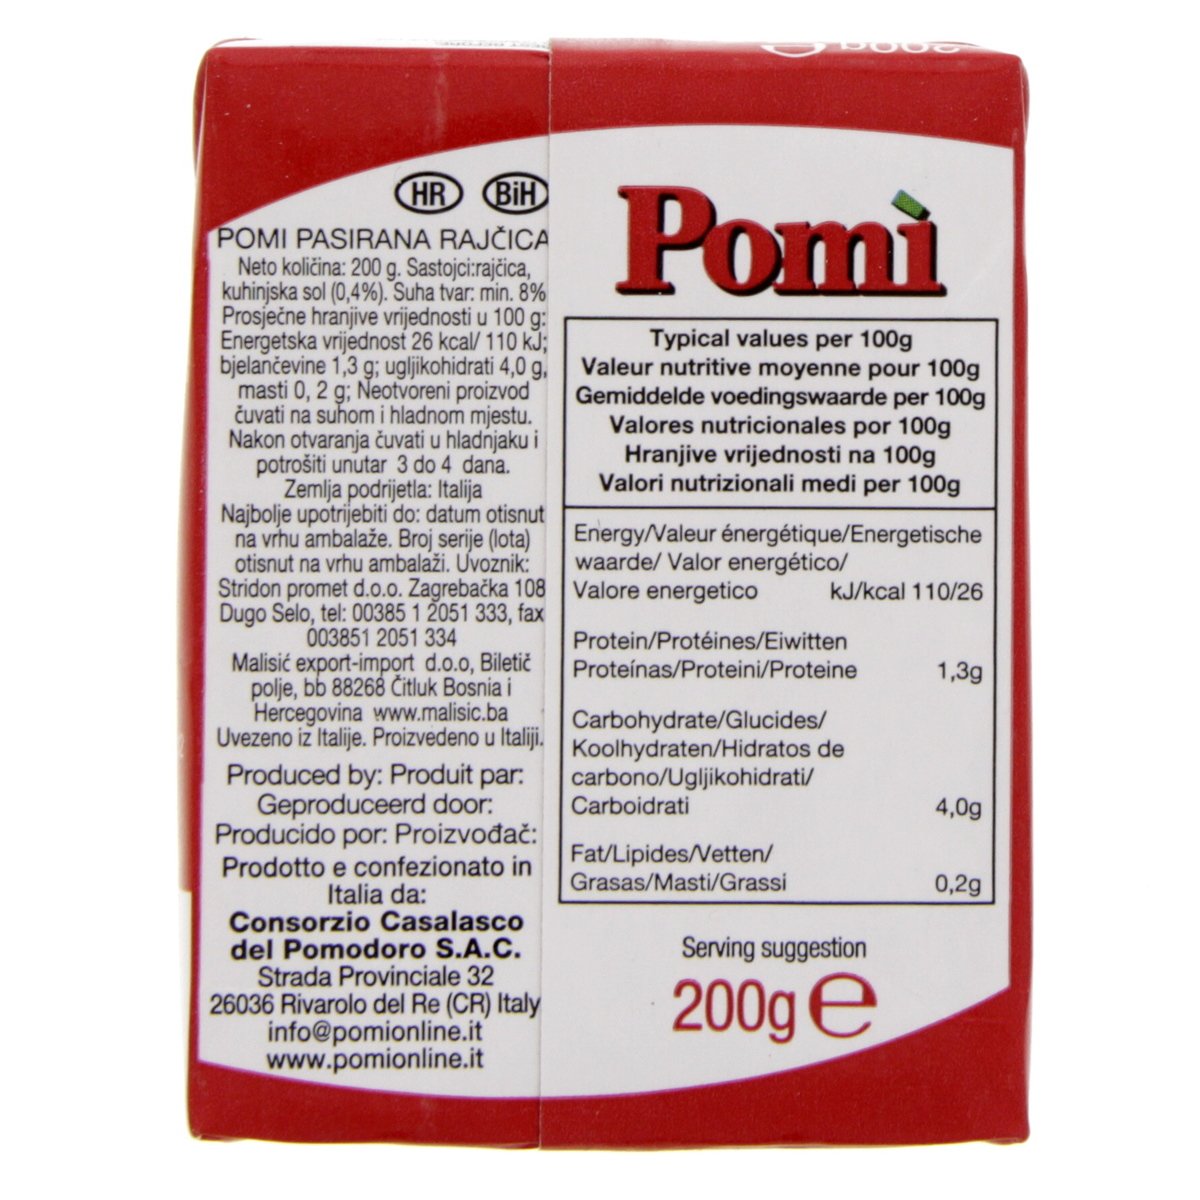 Pomi Strained Crushed Tomatoes 200 g